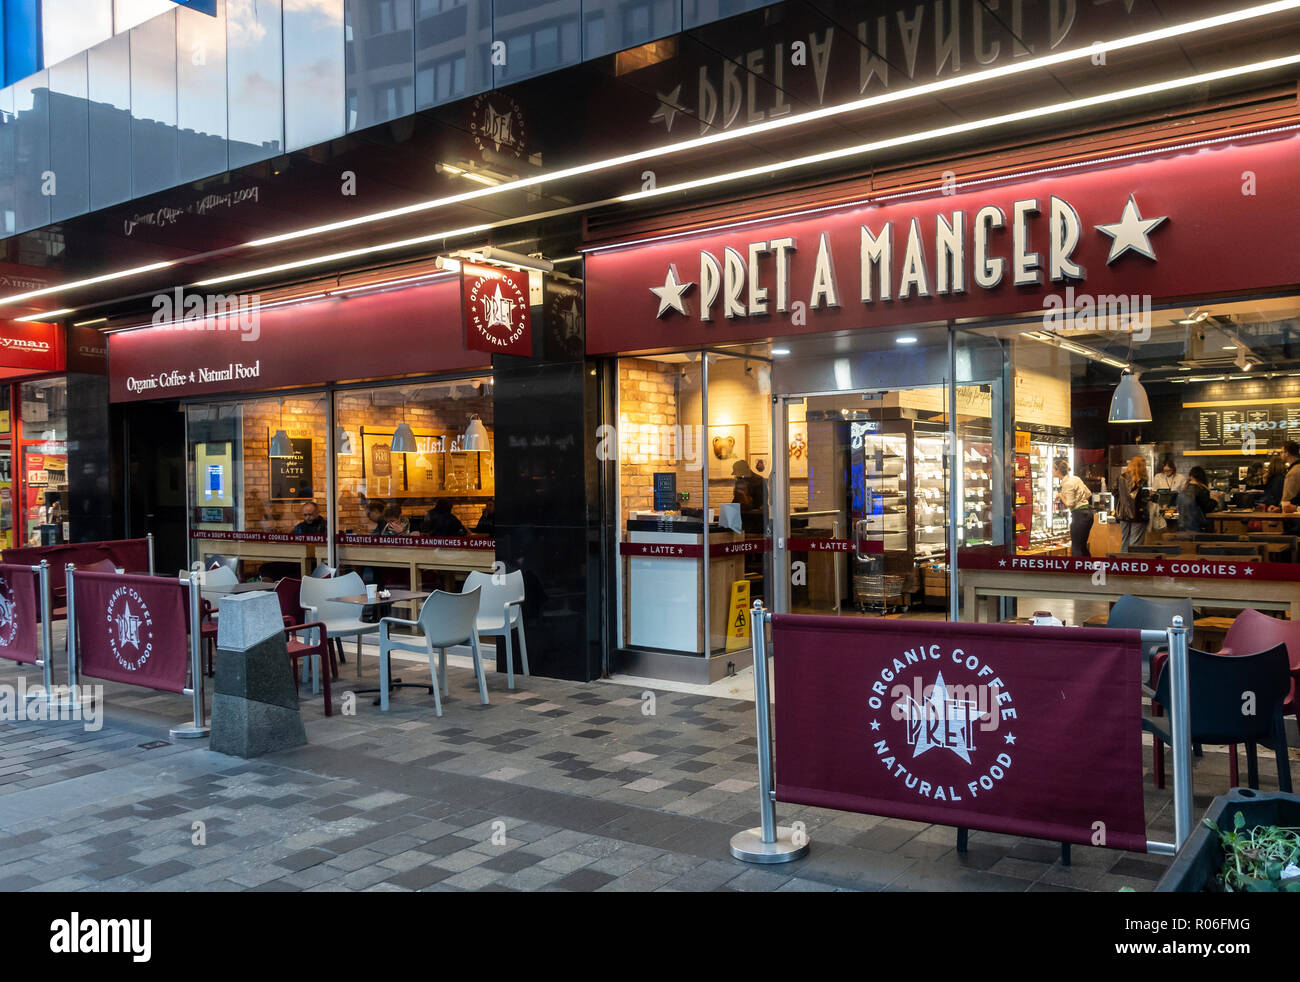 Exterior, entrance and window display of the Pret a Manger branch in central Glasgow, Scotland, UK Stock Photo